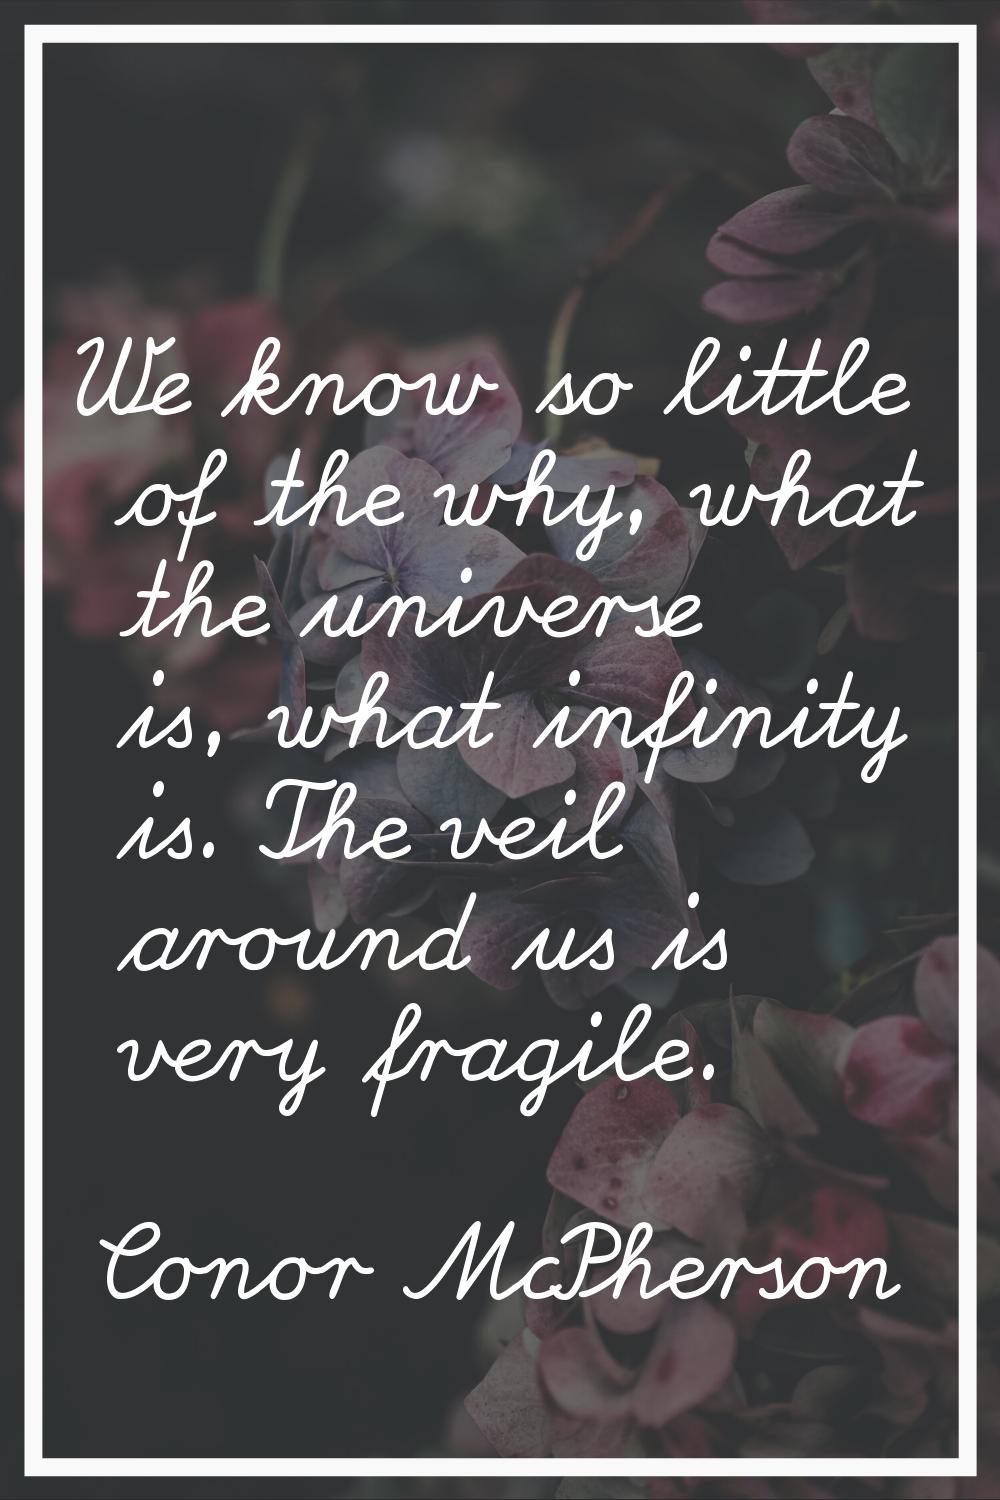 We know so little of the why, what the universe is, what infinity is. The veil around us is very fr